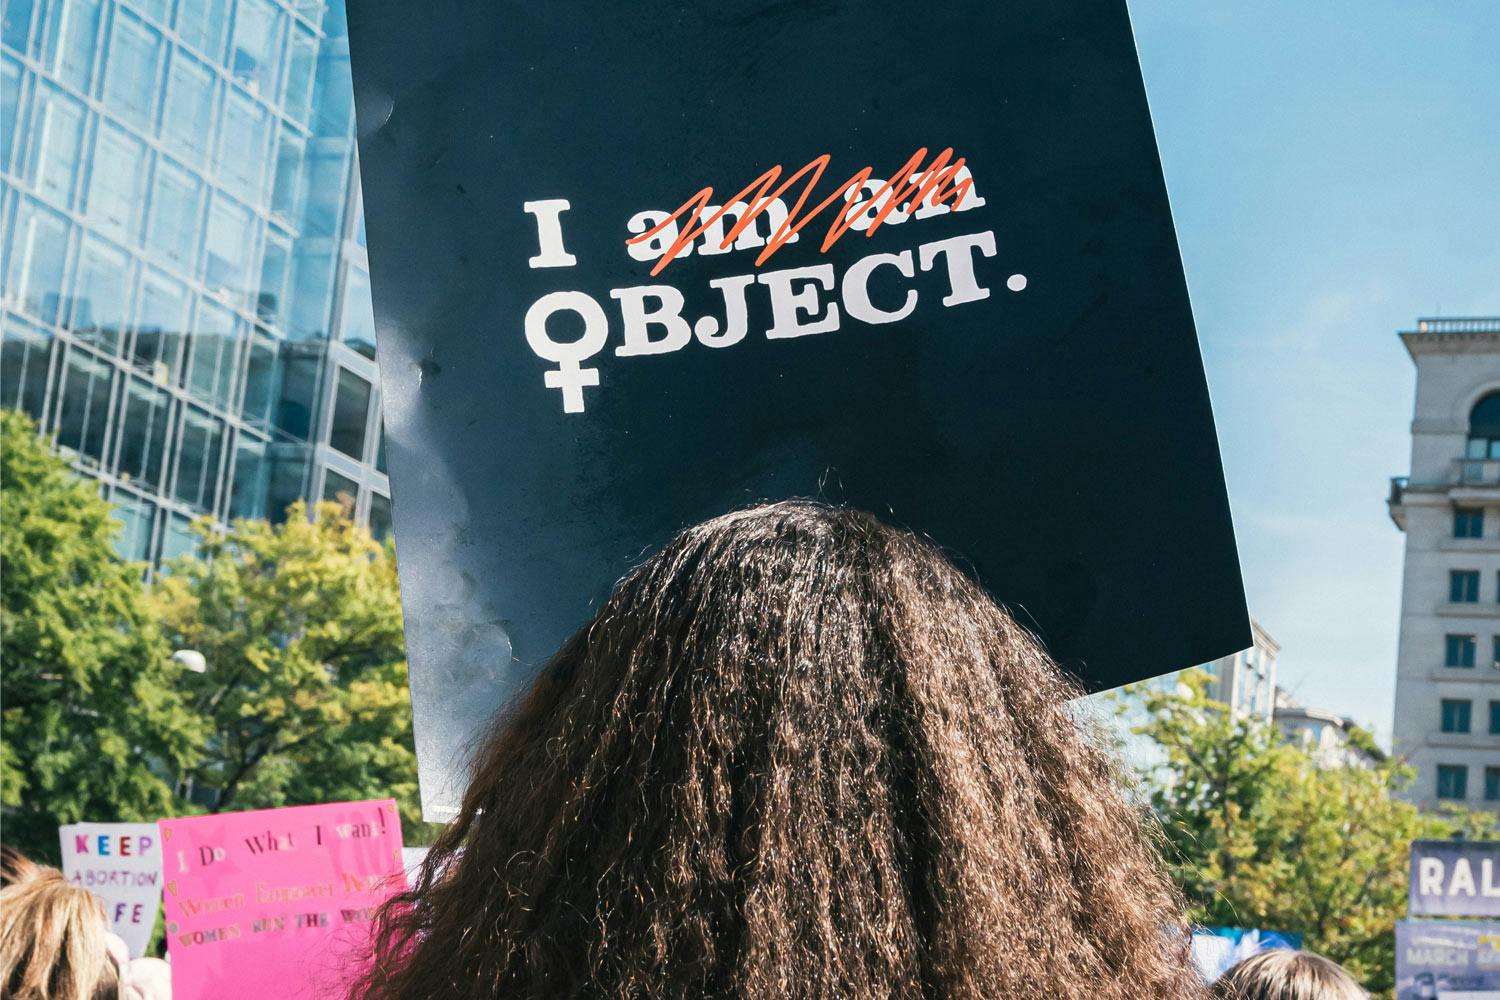 A woman with a sign bearing the text "I object" in white color seen from behind.